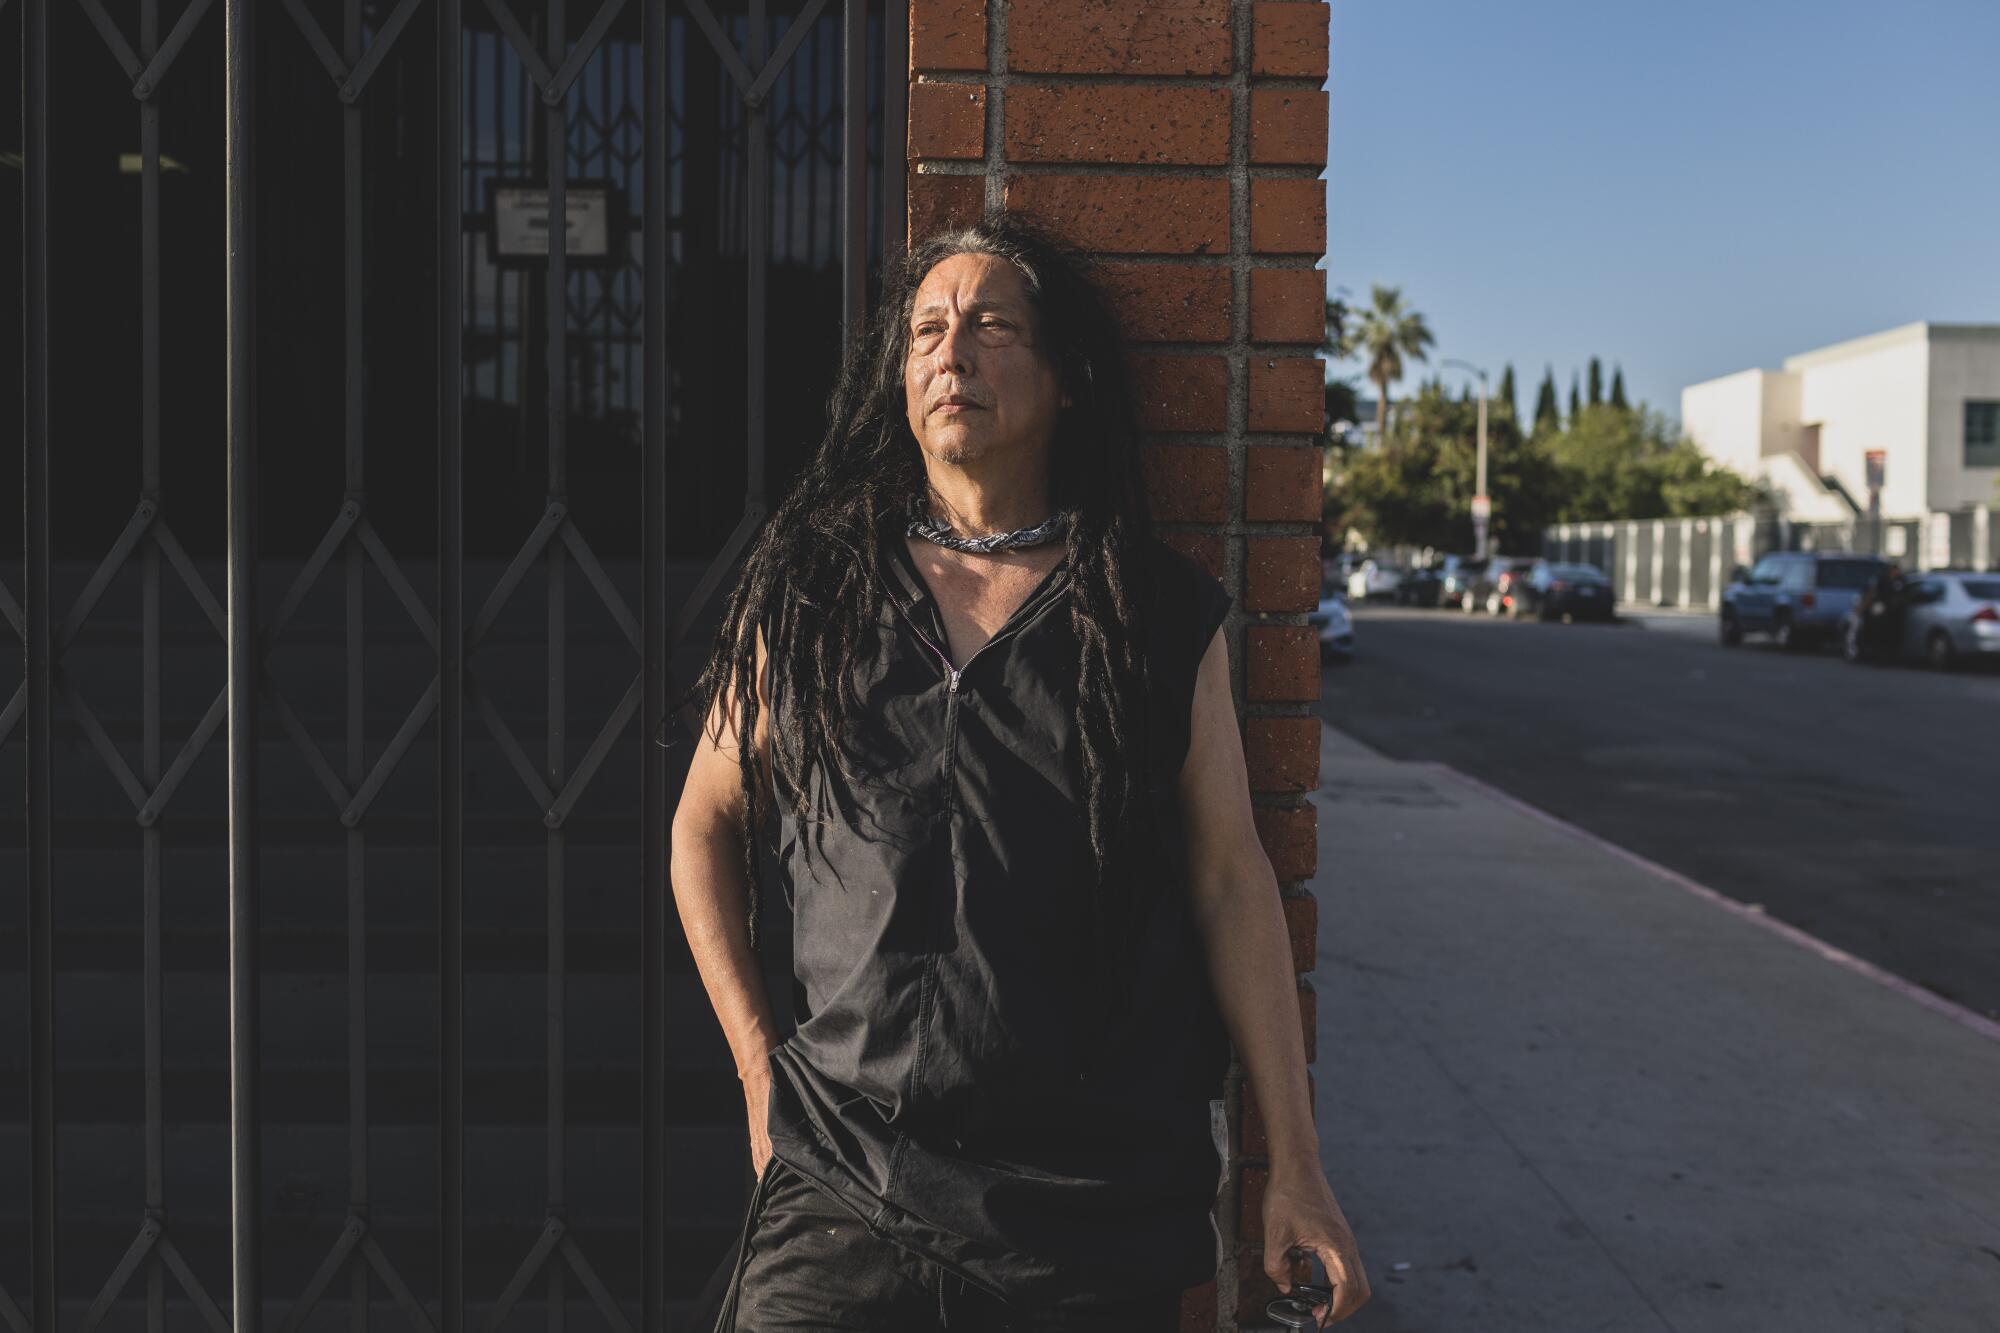 A man in a black shirt and pants stands on a street corner in Los Angeles in front of a locked gate.